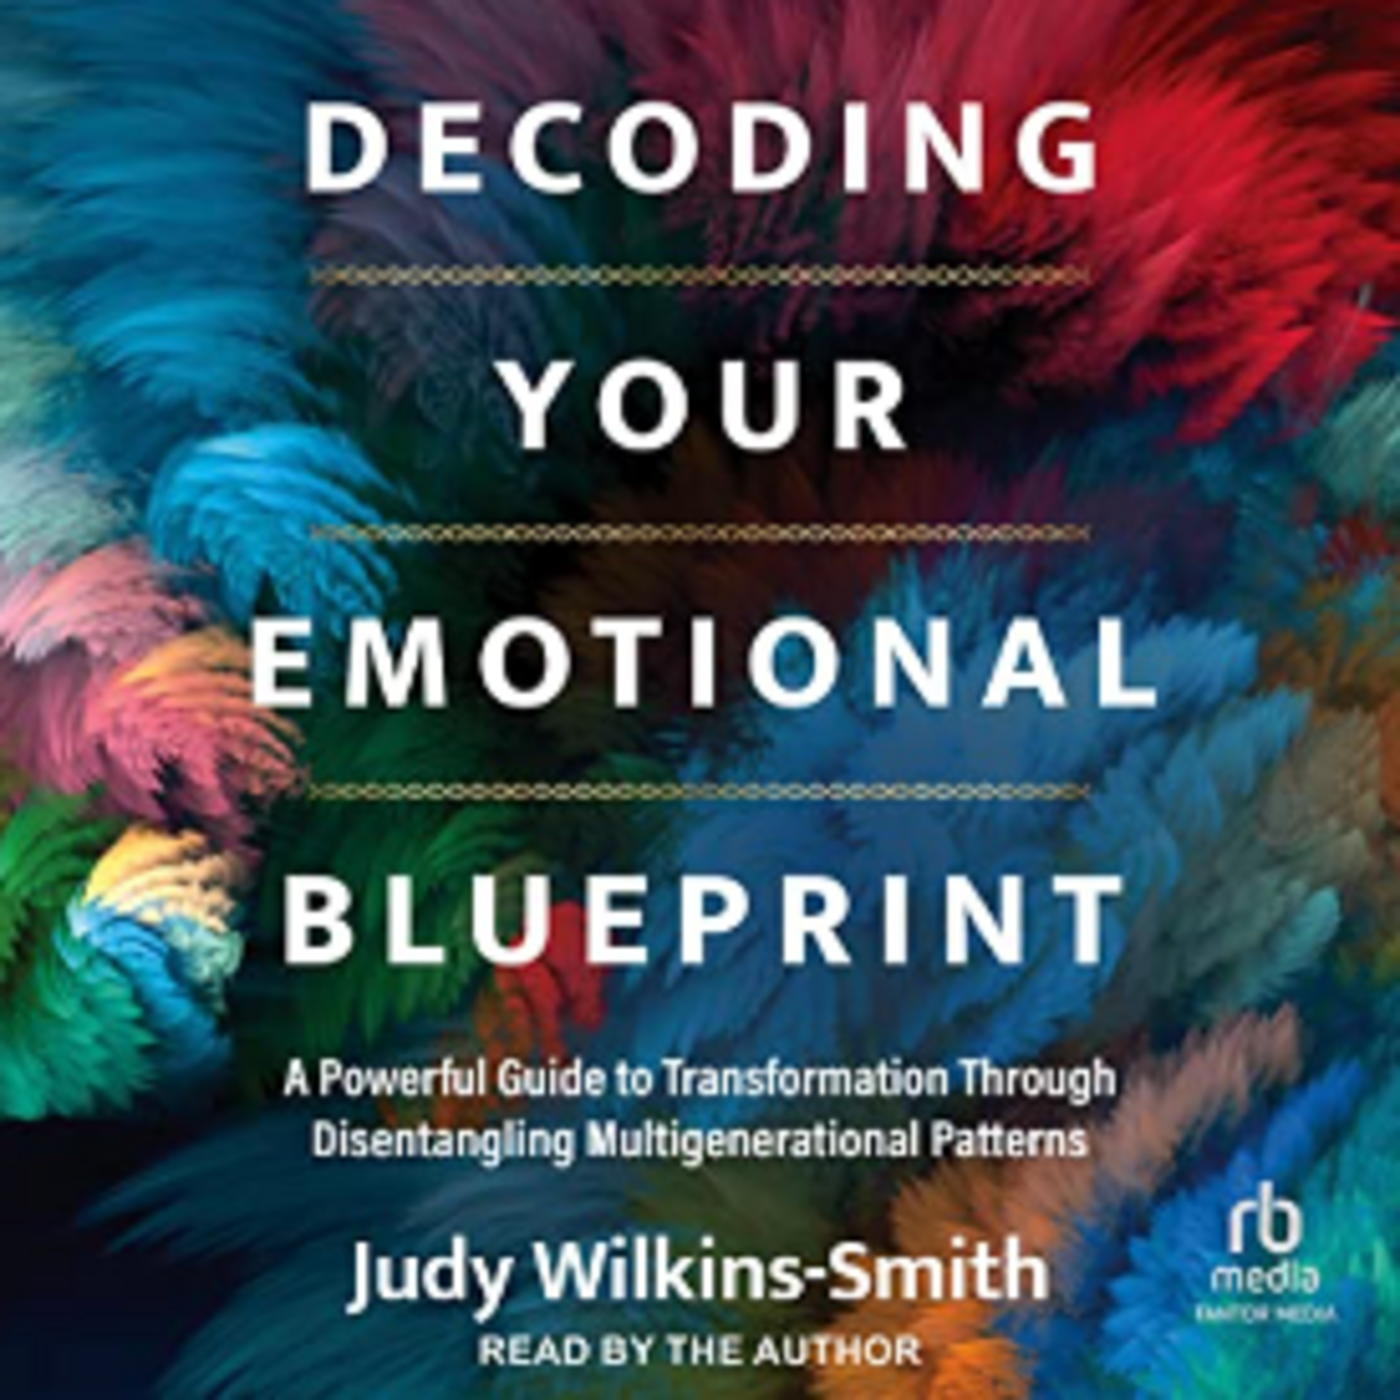 Episode 2319: Judy Wilkins-Smith ~  Fortune 500, J.P.Morgan, Exxon-Mobile  Consultant, Author, Decoding Your Emotional- Generational DNA